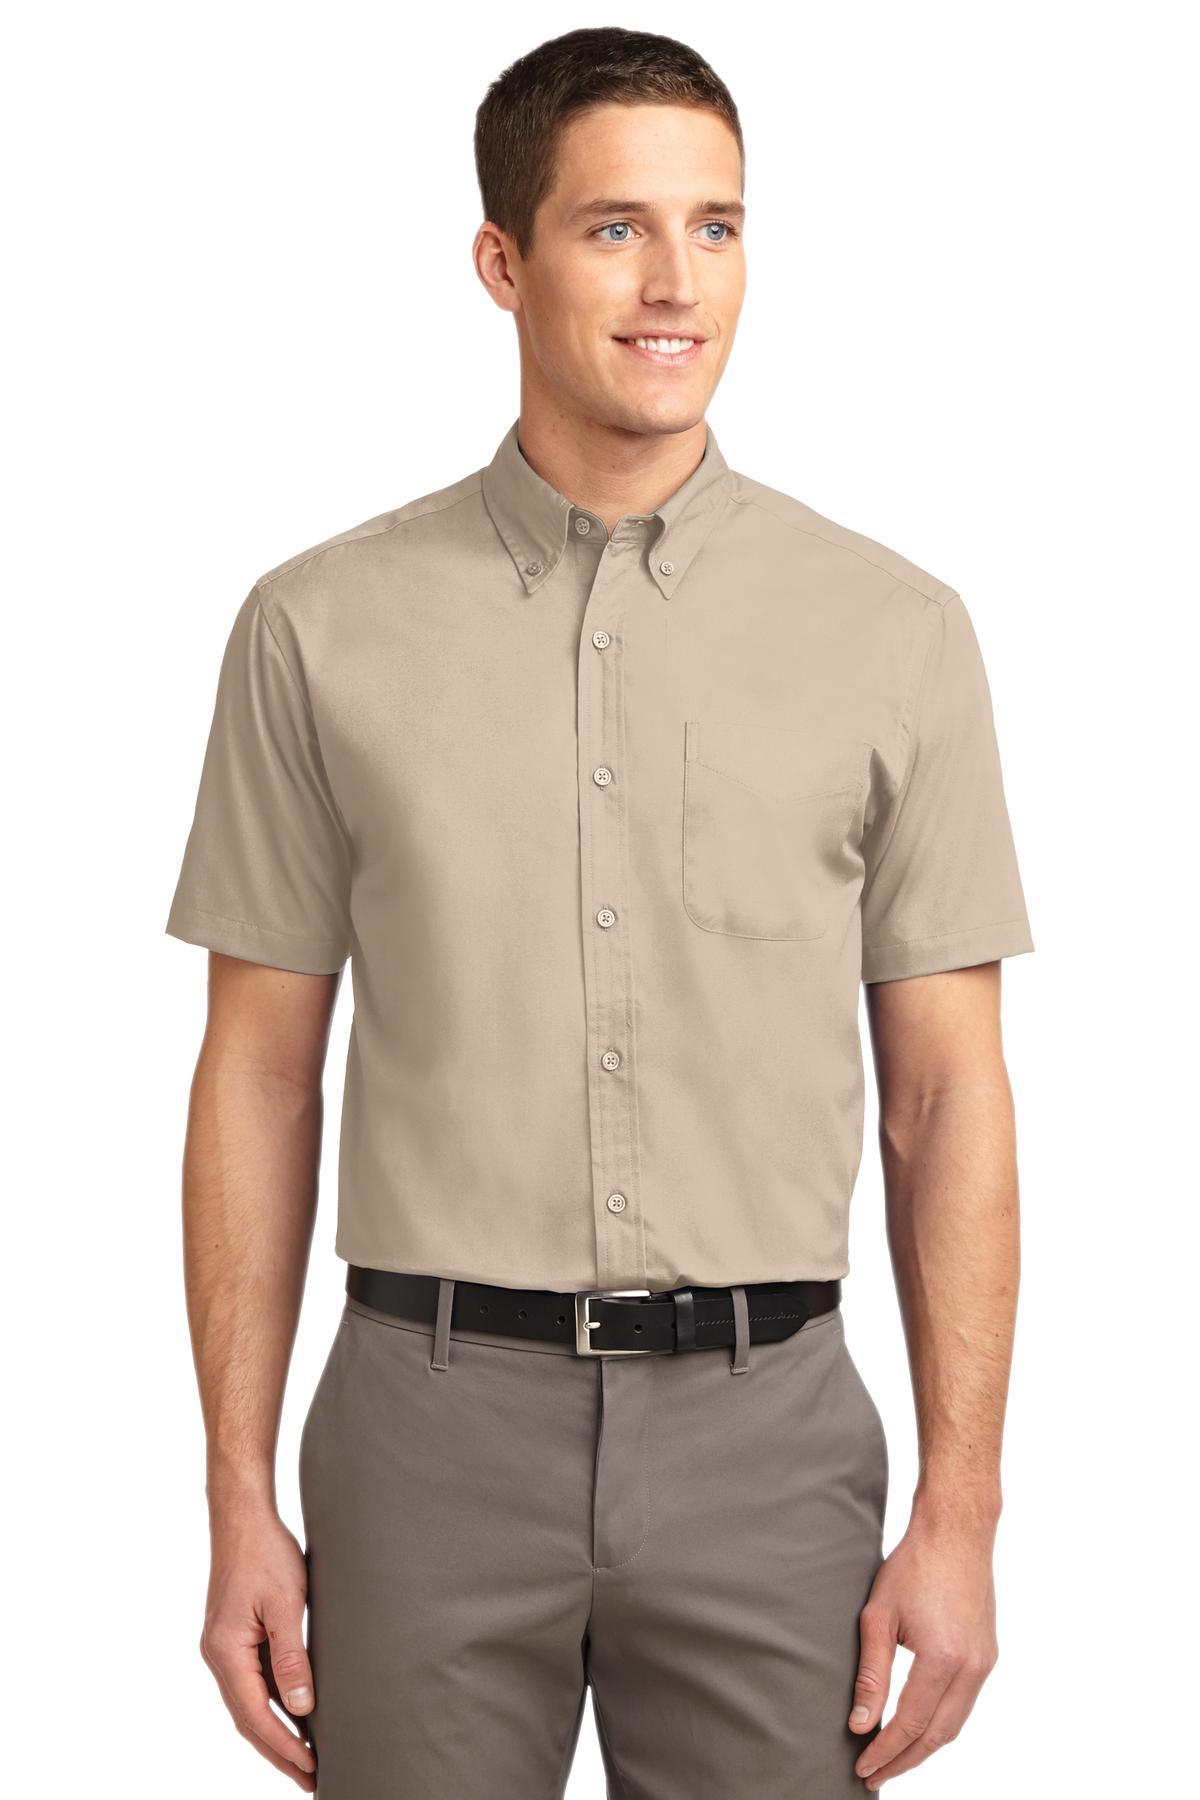 Port Authority Short Sleeve Easy Care Shirt. S508 - Dresses Max